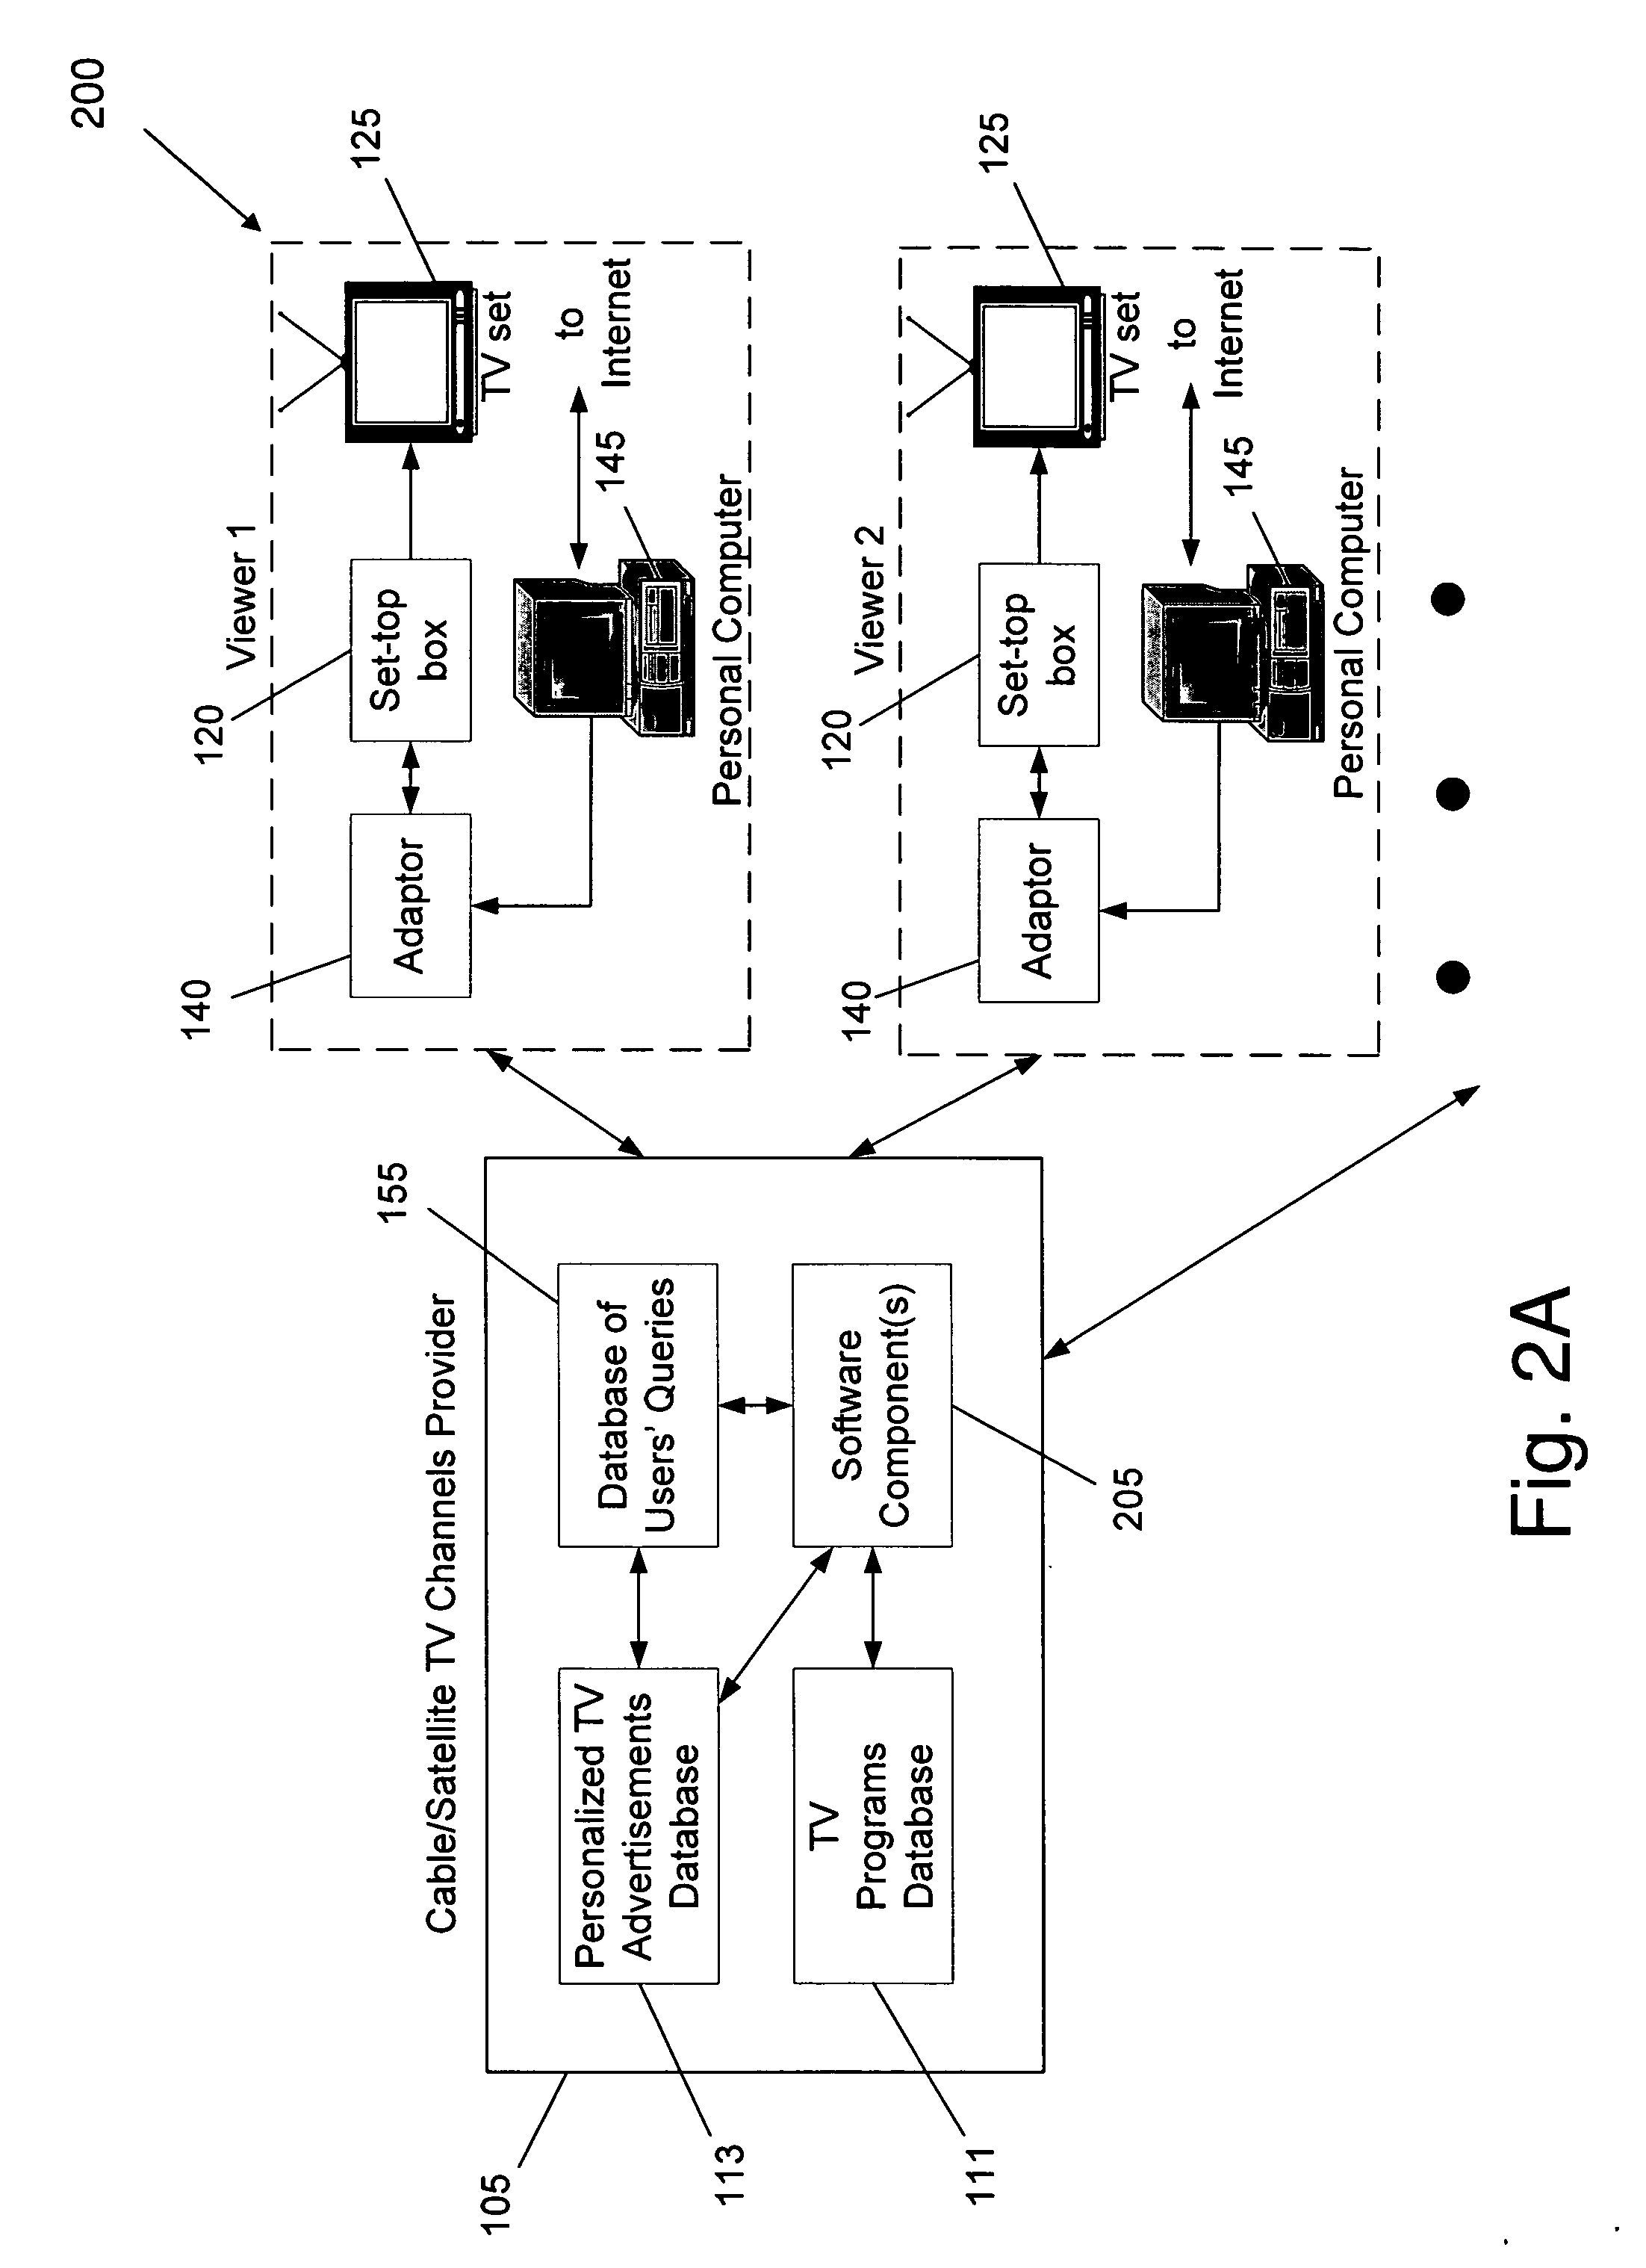 Method and system for providing targeted television advertising